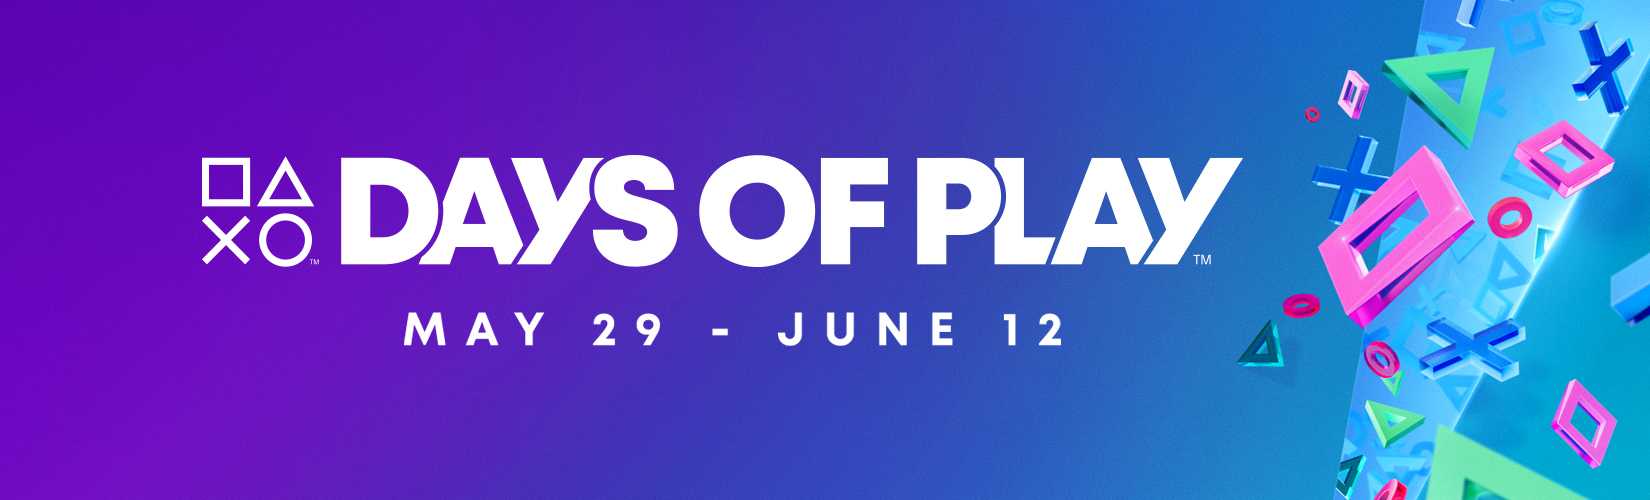 Sony. Days of play. May 29 - June 12.